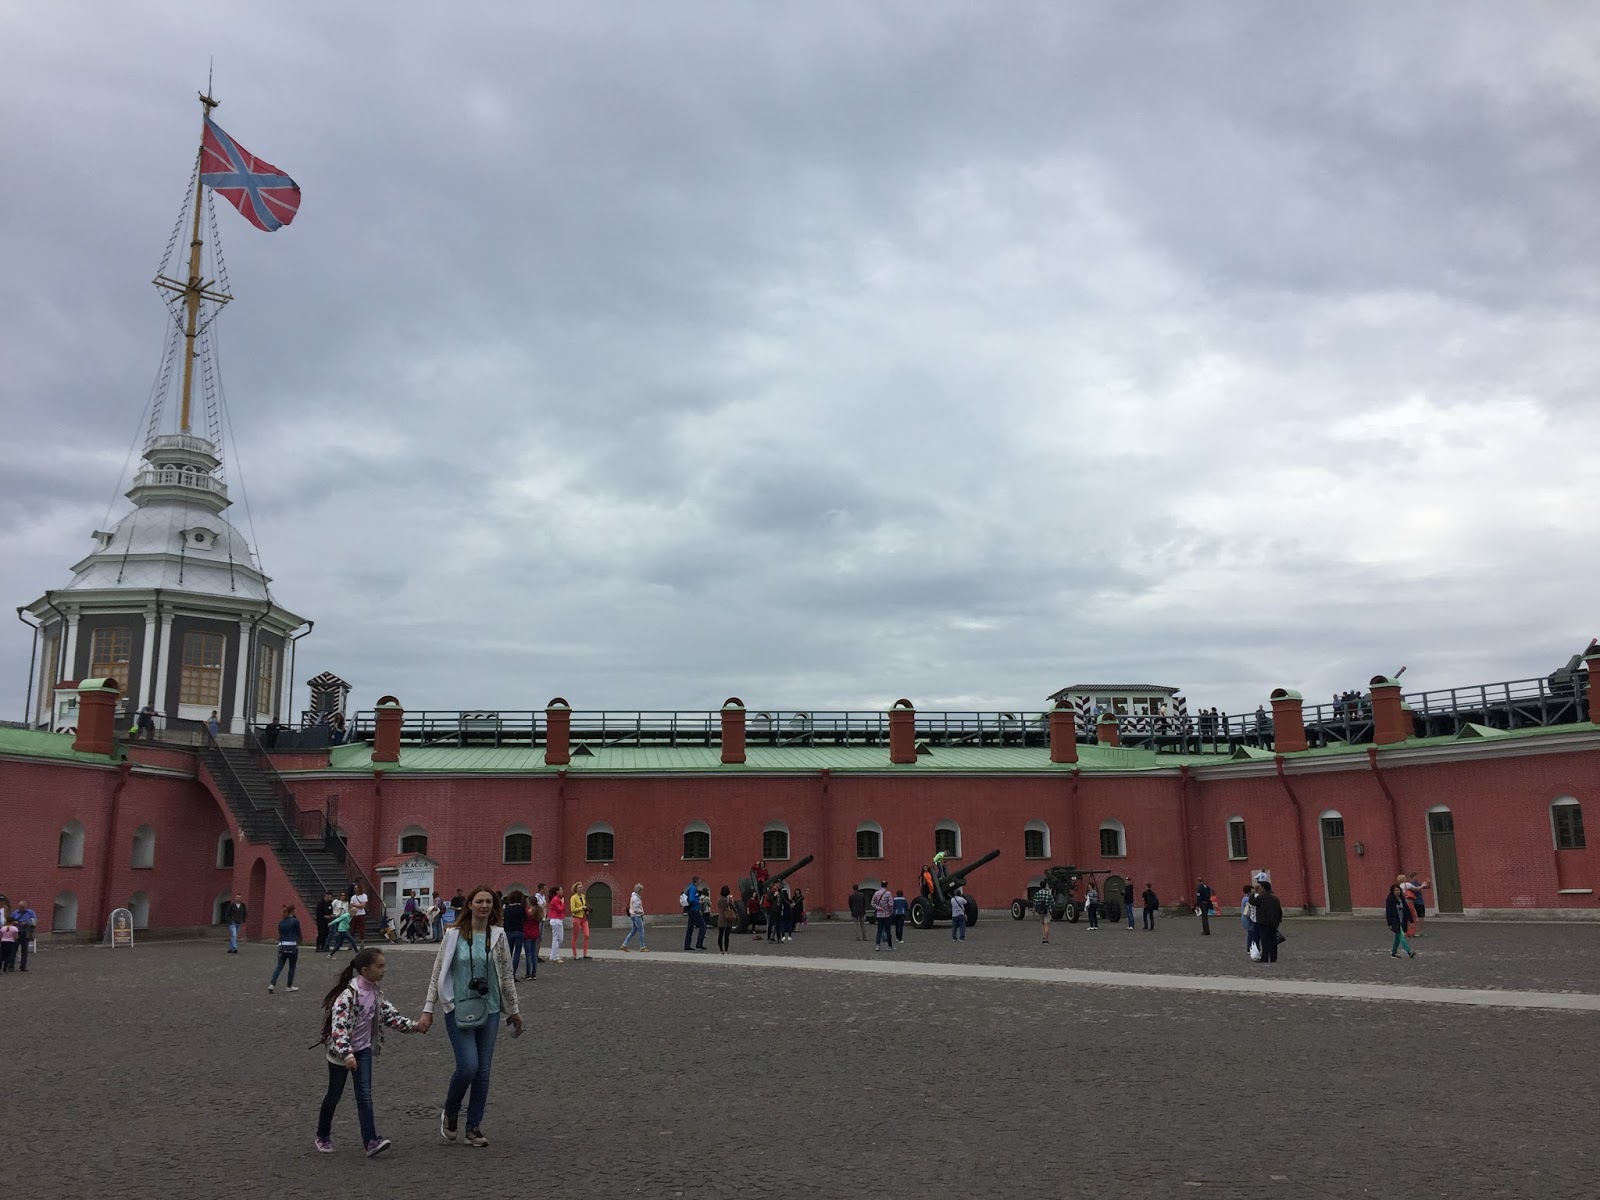 One of the bastions at the Peter & Paul fortress